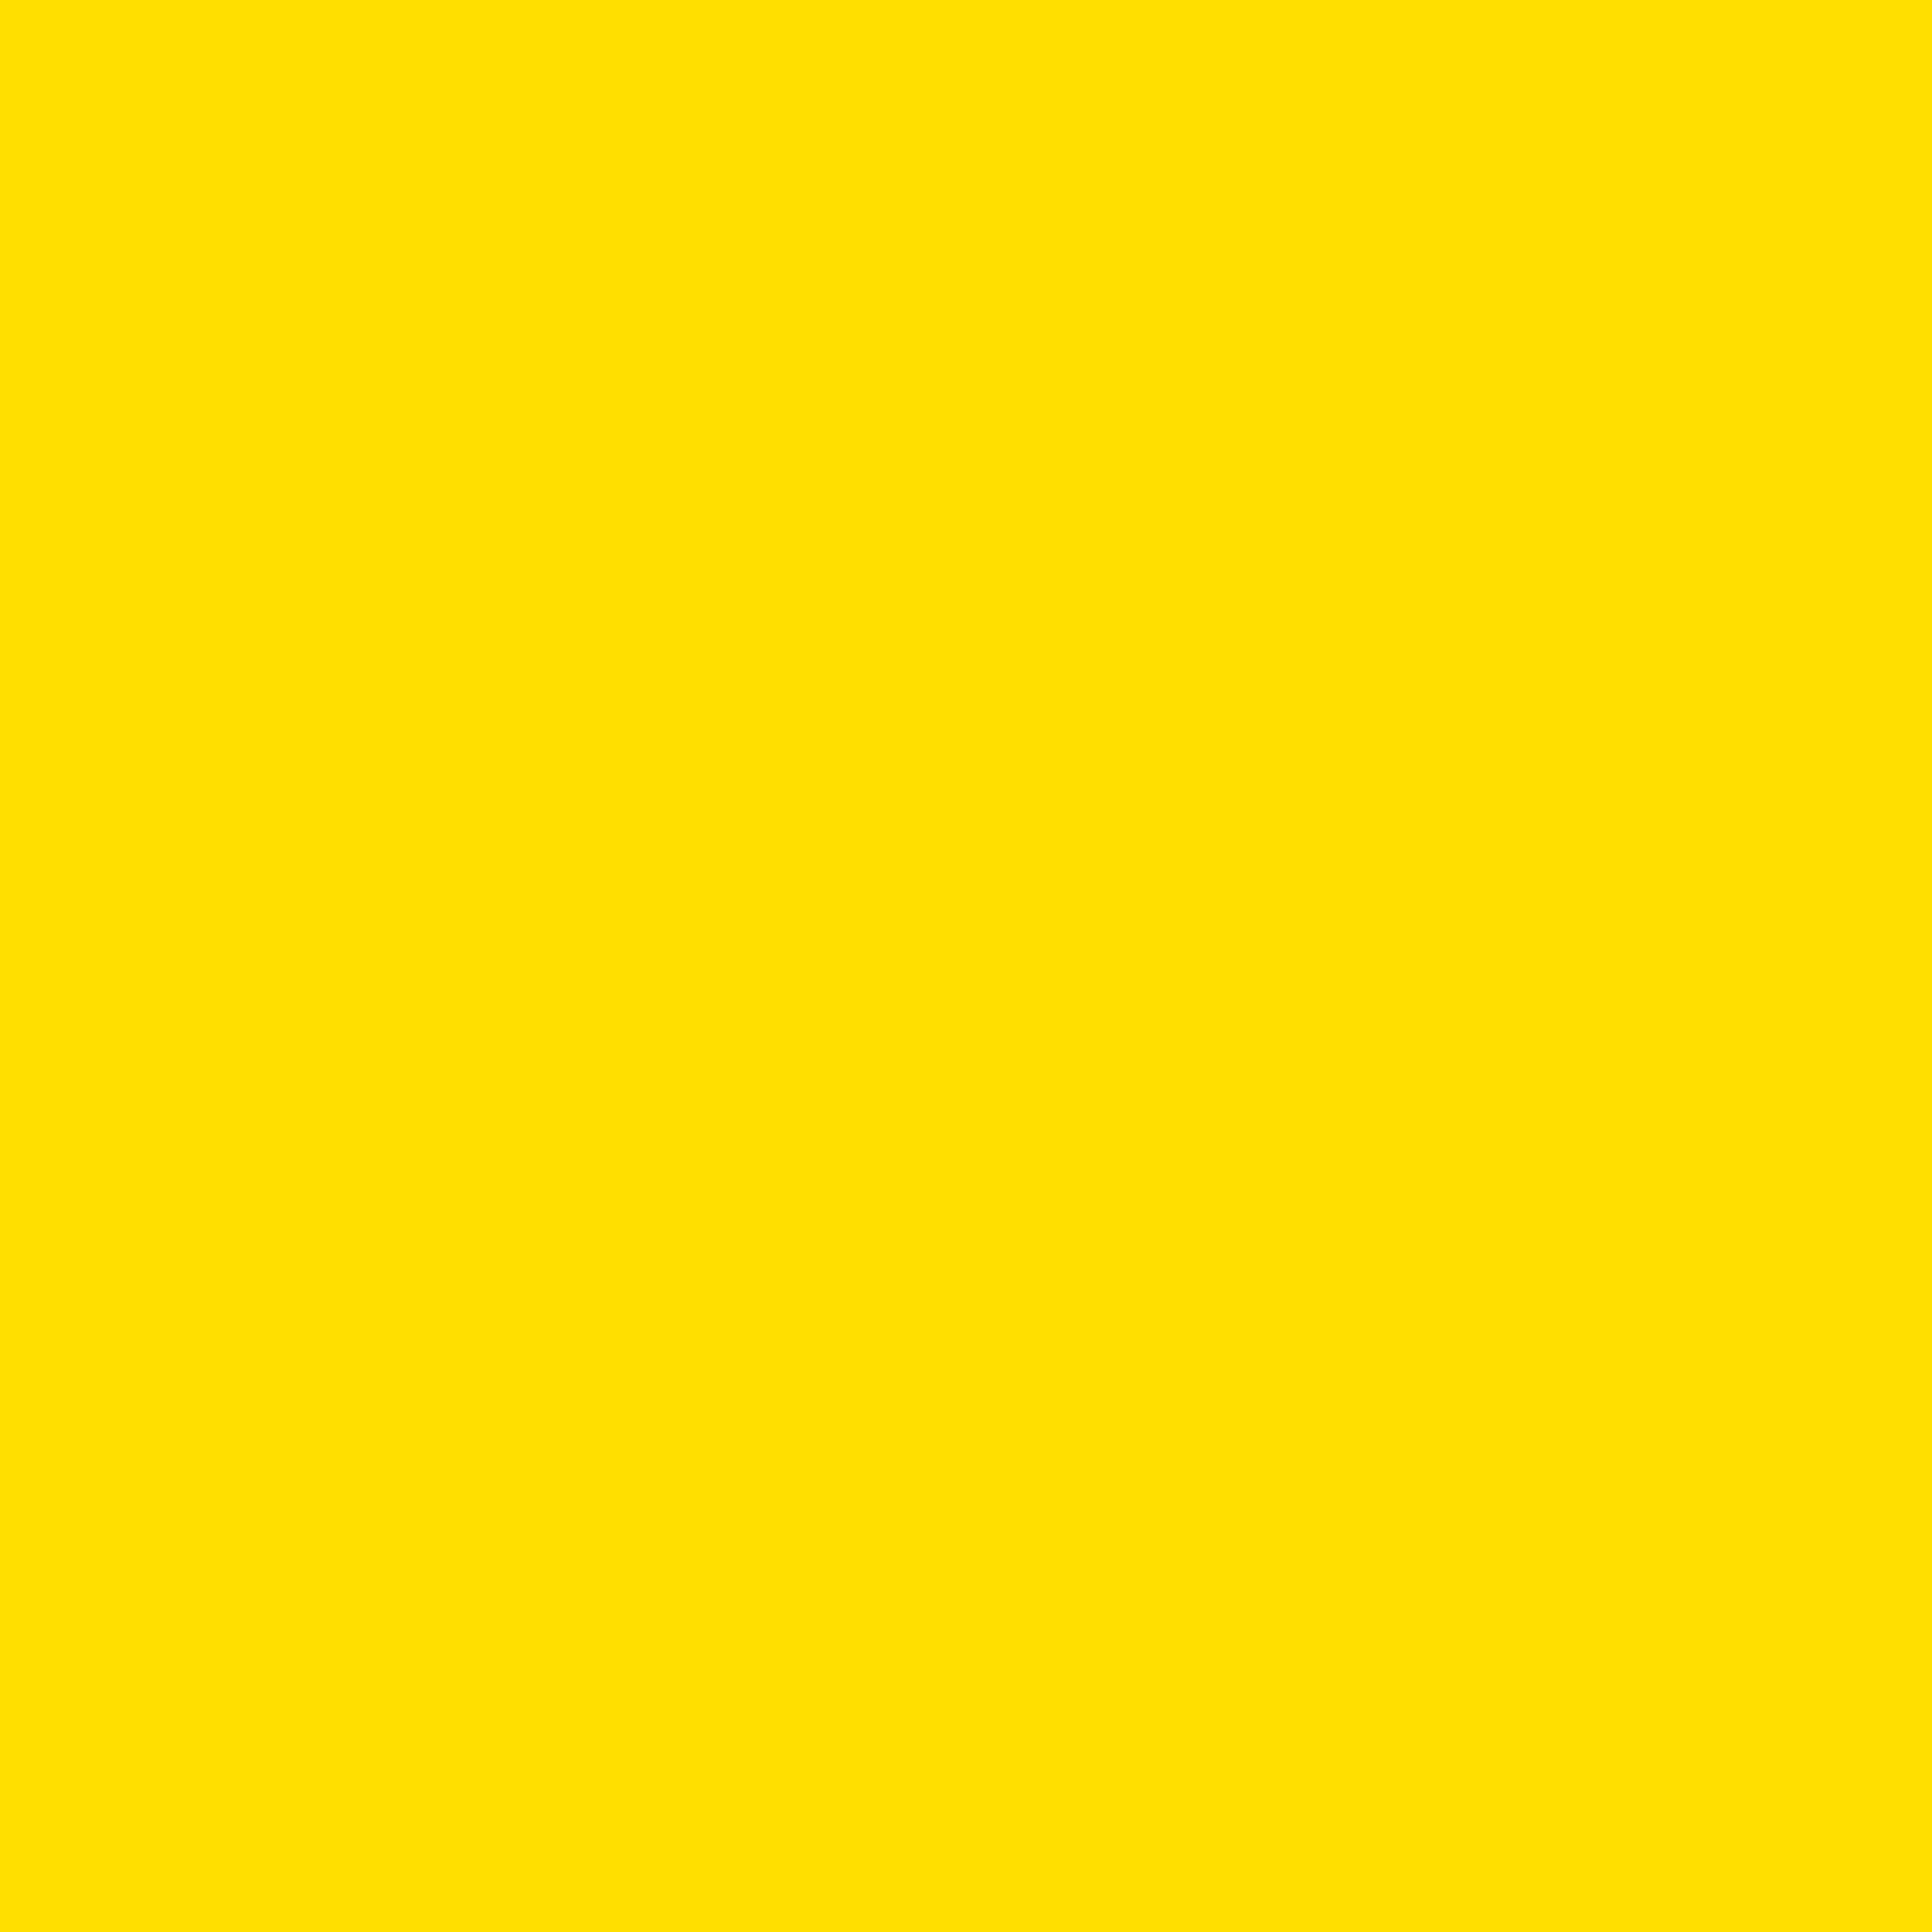 2732x2732 Golden Yellow Solid Color Background